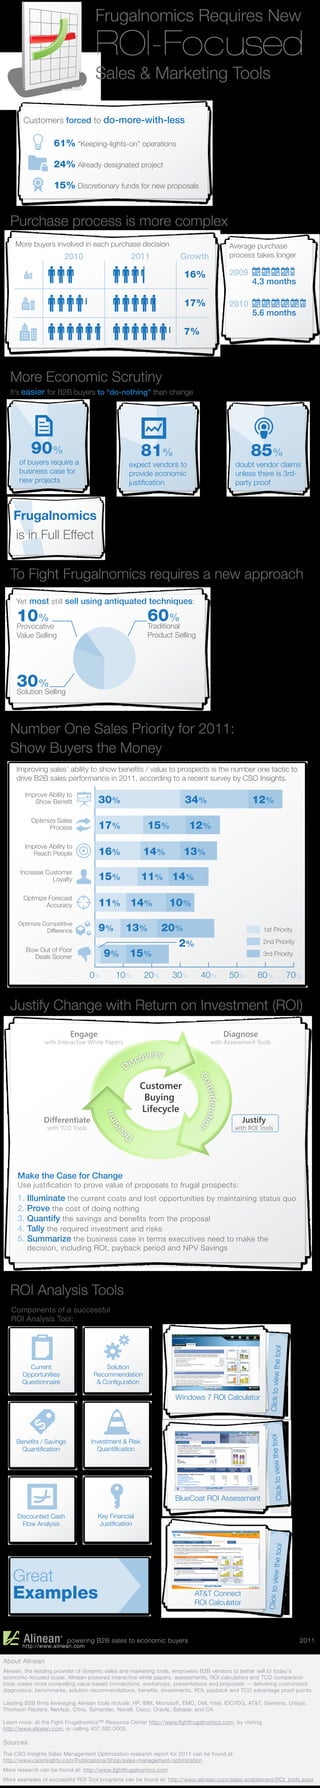 Frugalnomics Requires New
                                    ROI-Focused
                                    Sales & Marketing Tools

       Customers forced to do-more-with-less

                   61% “Keeping-lights-on” operations

                   24% Already designated project

                   15% Discretionary funds for new proposals


  Purchase process is more complex
    More buyers involved in each purchase decision                                           Average purchase
                       2010                       2011                Growth                 process takes longer

                                                                      16%                    2009
                                                                                                    4.3 months

                                                                      17%                    2010
                                                                                                    5.6 months

                                                                      7%



  More Economic Scrutiny
  It’s easier for B2B buyers to “do-nothing” than change




          90%                                         81%                                           85%
      of buyers require a                        expect vendors to                            doubt vendor claims




      !
      business case for                          provide economic                             unless there is 3rd-
      new projects                               justi cation                                 party proof



    Frugalnomics
    is in Full Effect


  To Fight Frugalnomics requires a new approach
     Yet most still sell using antiquated techniques:

     10%
     Provocative
                                                        60%
                                                        Traditional
     Value Selling                                      Product Selling




     30%
     Solution Selling




  Number One Sales Priority for 2011:
  Show Buyers the Money
     Improving sales’ ability to show bene ts / value to prospects is the number one tactic to
     drive B2B sales performance in 2011, according to a recent survey by CSO Insights.

        Improve Ability to
           Show Bene t               30%                               34%                          12%
          Optimize Sales
                Process              17%                15%             12%
        Improve Ability to
           Reach People              16%              14%             13%
      Increase Customer
                 Loyalty             15%              11% 14%
       Optmize Forecast
              Accuracy               11% 14%                     10%
     Optimize Competitive
               Difference            9%         13%          20%                                        1st Priority


        Bow Out of Poor
                                                               2%                                       2nd Priority

          Deals Sooner                 9% 15%                                                           3rd Priority


                                  0%        10%        20%        30%        40%             50%      60%                           70%


  Justify Change with Return on Investment (ROI)
                          Engage                                                            Diagnose
                with Interactive White Papers                                      with Assessment Tools

                                                      ery
                                                  scov
                                                Di
                                                                            Co




                                                     Customer
                                                                              nsideration




                                                      Buying
                                                     Lifecycle
                                           on




               Differentiate                                                                    Justify
                                        isi




                 with TCO Tools                                                               with ROI Tools
                                       c




                                                De



     Make the Case for Change
     Use justi cation to prove value of proposals to frugal prospects:
     1. Illuminate the current costs and lost opportunities by maintaining status quo
     2. Prove the cost of doing nothing
     3. Quantify the savings and bene ts from the proposal
     4. Tally the required investment and risks
     5. Summarize the business case in terms executives need to make the
         decision, including ROI, payback period and NPV Savings




  ROI Analysis Tools
   Components of a successful
   ROI Analysis Tool:
                                                                                                                  l             o
                                                                                                           Click to view the to




         Current                       Solution
       Opportunities               Recommendation
       Questionnaire                & Con guration

                                                                   Windows 7 ROI Calculator
                                                                                                           e tool




     Bene ts / Savings            Investment & Risk
      Quanti cation                 Quanti cation
                                                                                                              Click to view th




                                                                   BlueCoat ROI Assessment

     Discounted Cash                 Key Financial
       Flow Analysis                 Justi cation
                                                                                                               the tool




   Great
                                                                                                          Click to view




   Examples                                                                AT&T Connect
                                                                           ROI Calculator




                         powering B2B sales to economic buyers                                                                        2011
       http://www.alinean.com

About Alinean
Alinean, the leading provider of dynamic sales and marketing tools, empowers B2B vendors to better sell to today's
economic-focused buyer. Alinean-powered interactive white papers, assessments, ROI calculators and TCO comparison
tools create more compelling value-based connections, workshops, presentations and proposals — delivering customized
diagnostics, benchmarks, solution recommendations, bene ts, investments, ROI, payback and TCO advantage proof points.

Leading B2B rms leveraging Alinean tools include: HP, IBM, Microsoft, EMC, Dell, Intel, IDC/IDG, AT&T, Siemens, Unisys,
Thomson Reuters, NetApp, Citrix, Symantec, Novell, Cisco, Oracle, Sybase, and CA.

Learn more: at the Fight Frugalnomics™ Resource Center http://www. ghtfrugalnomics.com, by visiting
http://www.alinean.com, or calling 407.382.0005.

Sources
The CSO Insights Sales Management Optimization research report for 2011 can be found at:
http://www.csoinsights.com/Publications/Shop/sales-management-optimization
More research can be found at: http://www. ghtfrugalnomics.com
More examples of successful ROI Tool programs can be found at: http://www.alinean.com/sales-enablement/ROI_tools.aspx
 